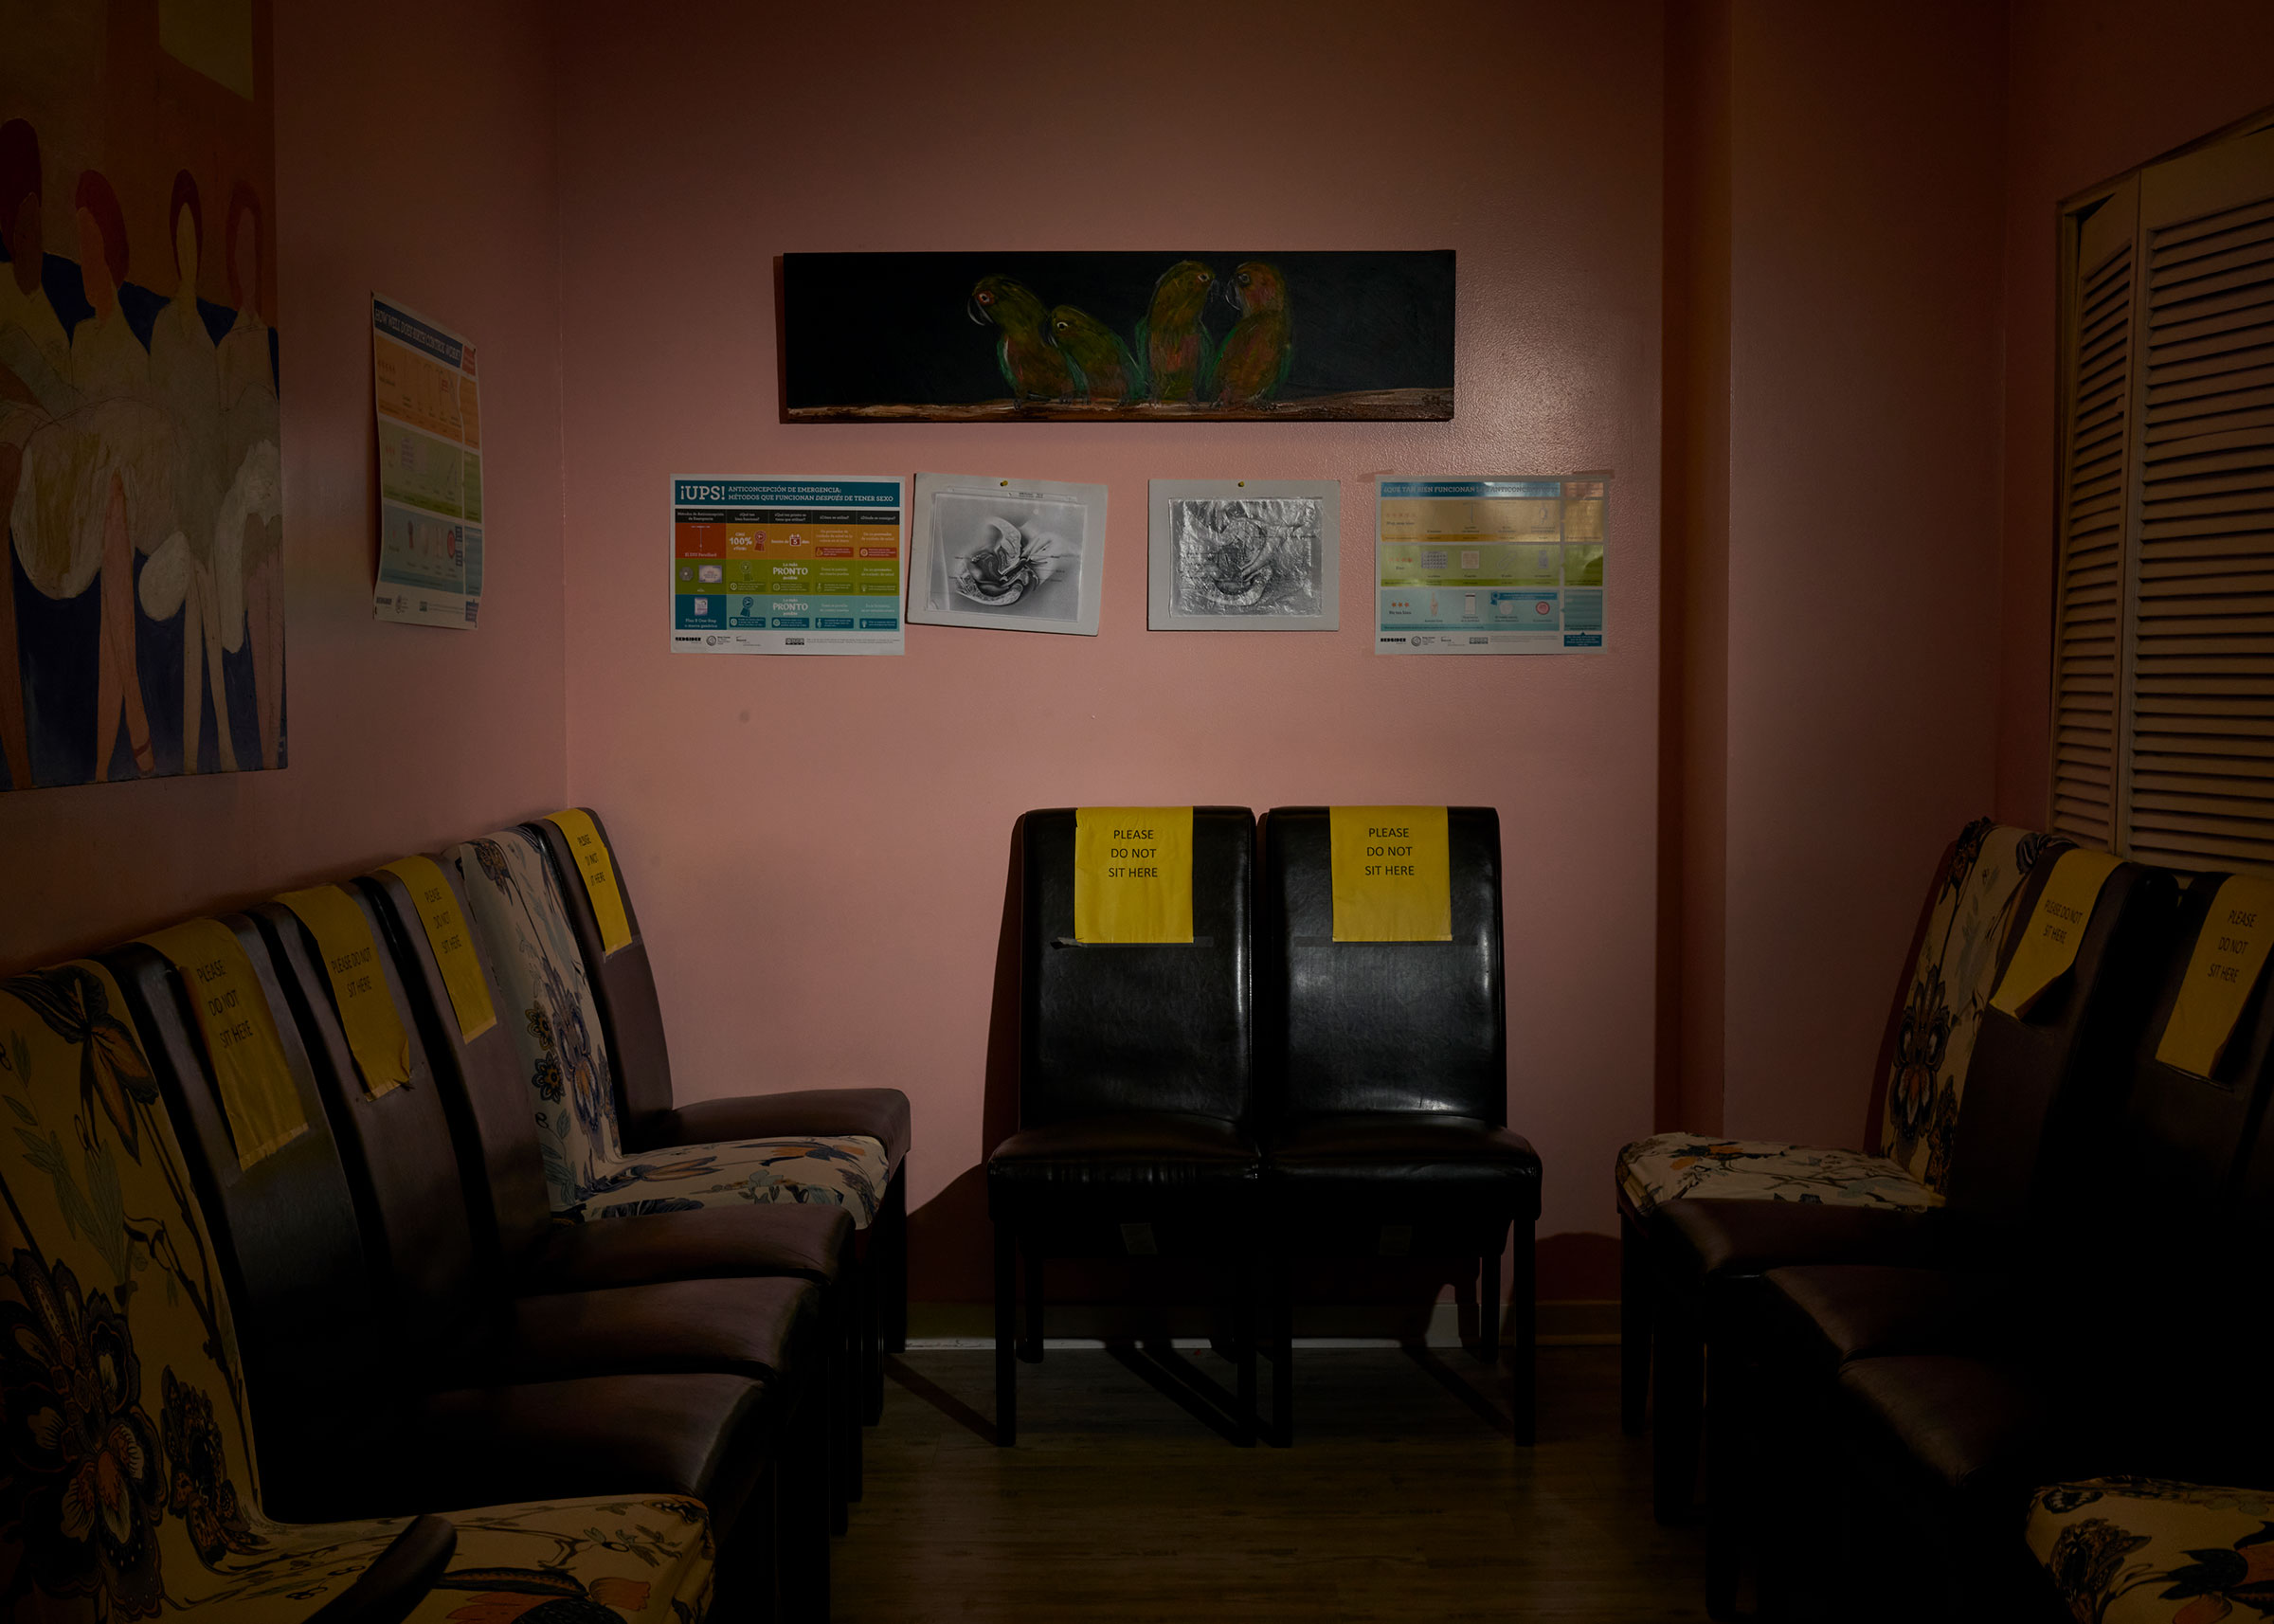 An empty waiting room inside the <a href="https://time.com/6116072/mississippi-abortion-supreme-court-jackson-womens-health/">Jackson Women’s Health Organization</a> on Oct. 29. (Stacy Kranitz for TIME)